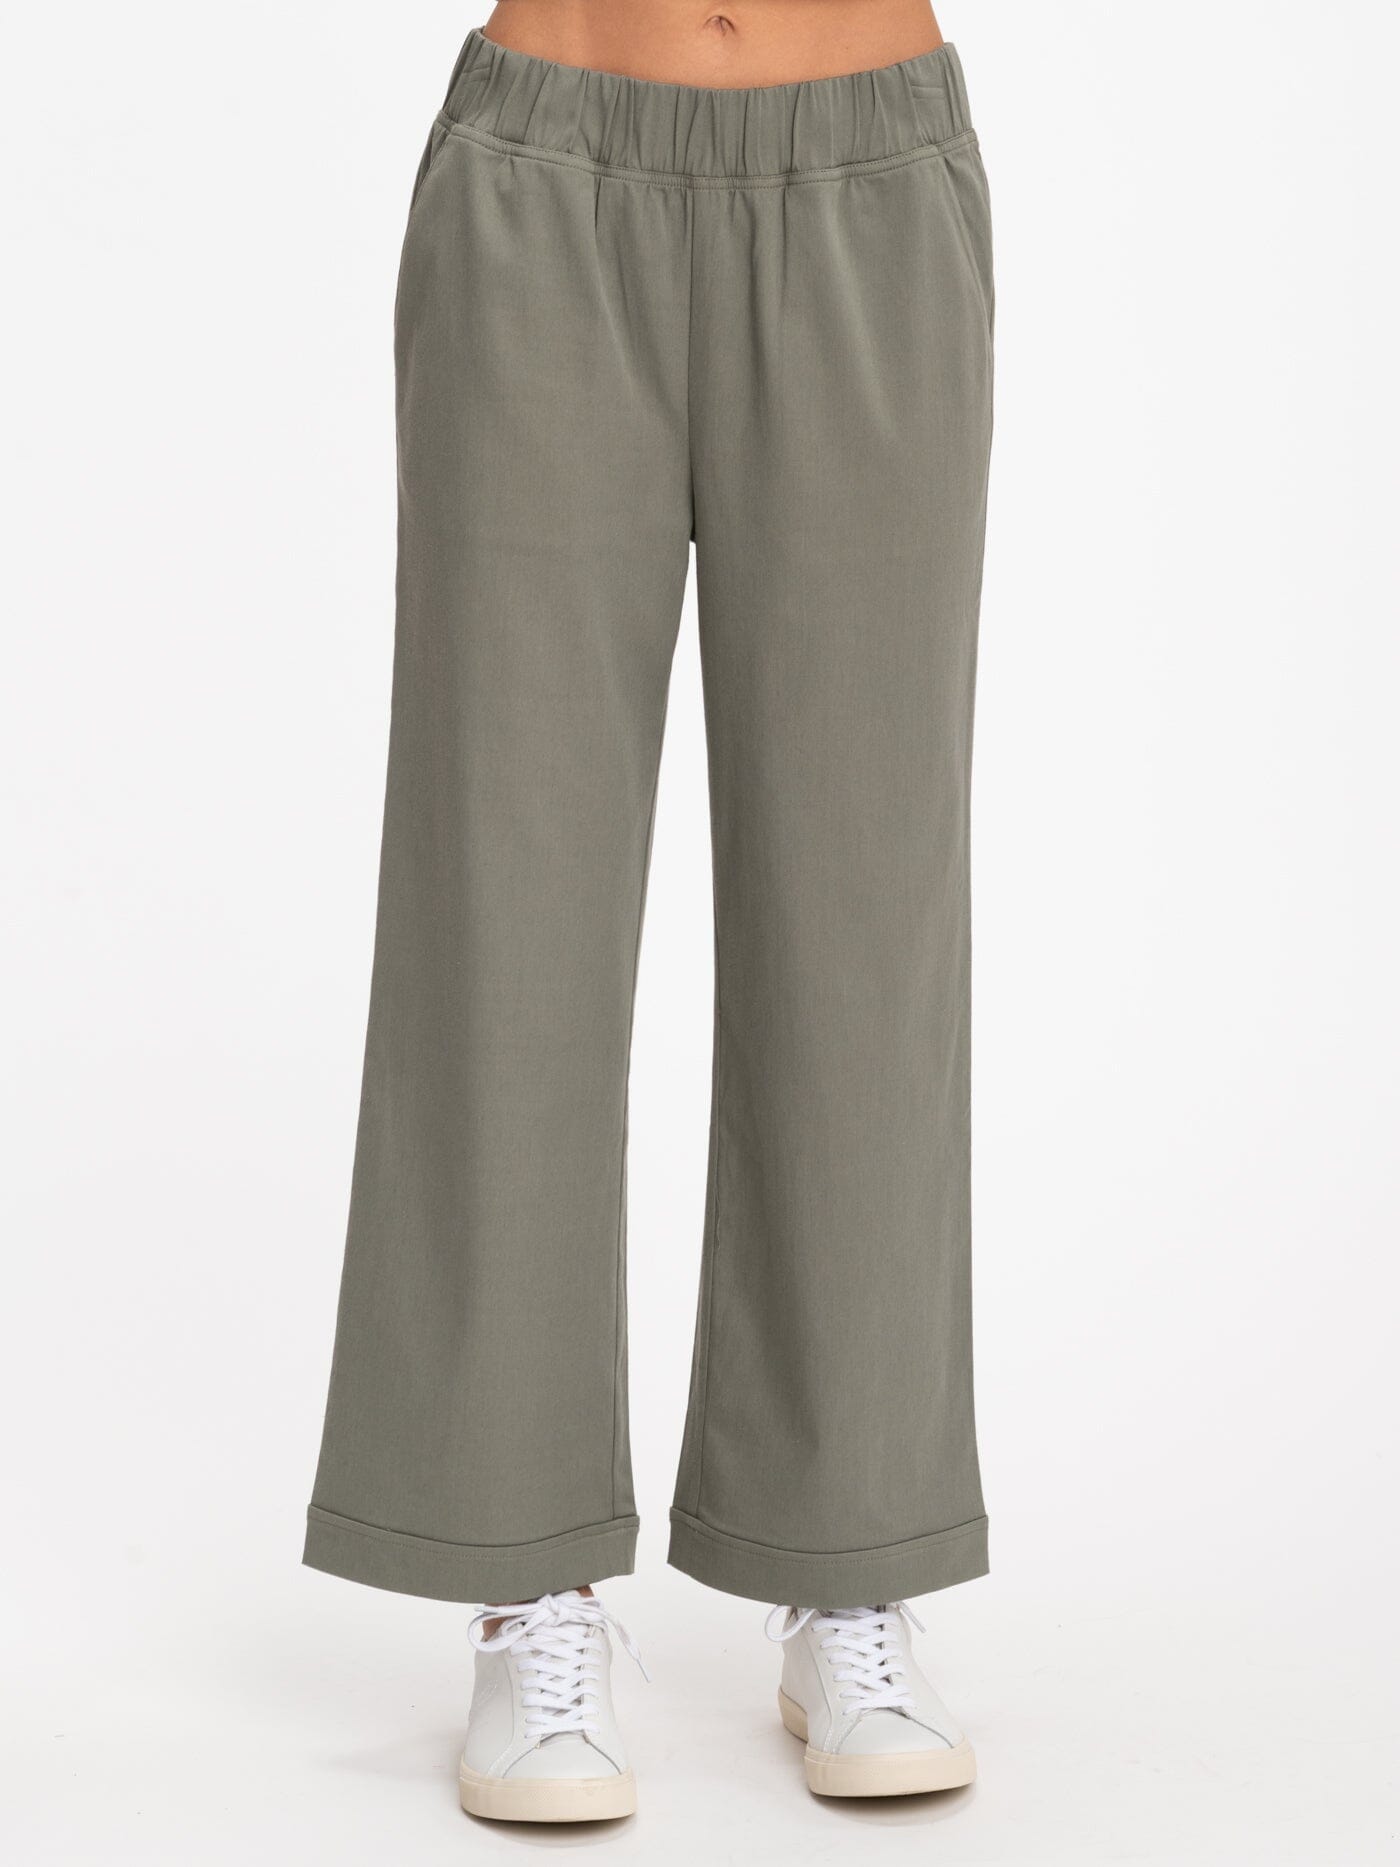 Women's Pants – Threads 4 Thought